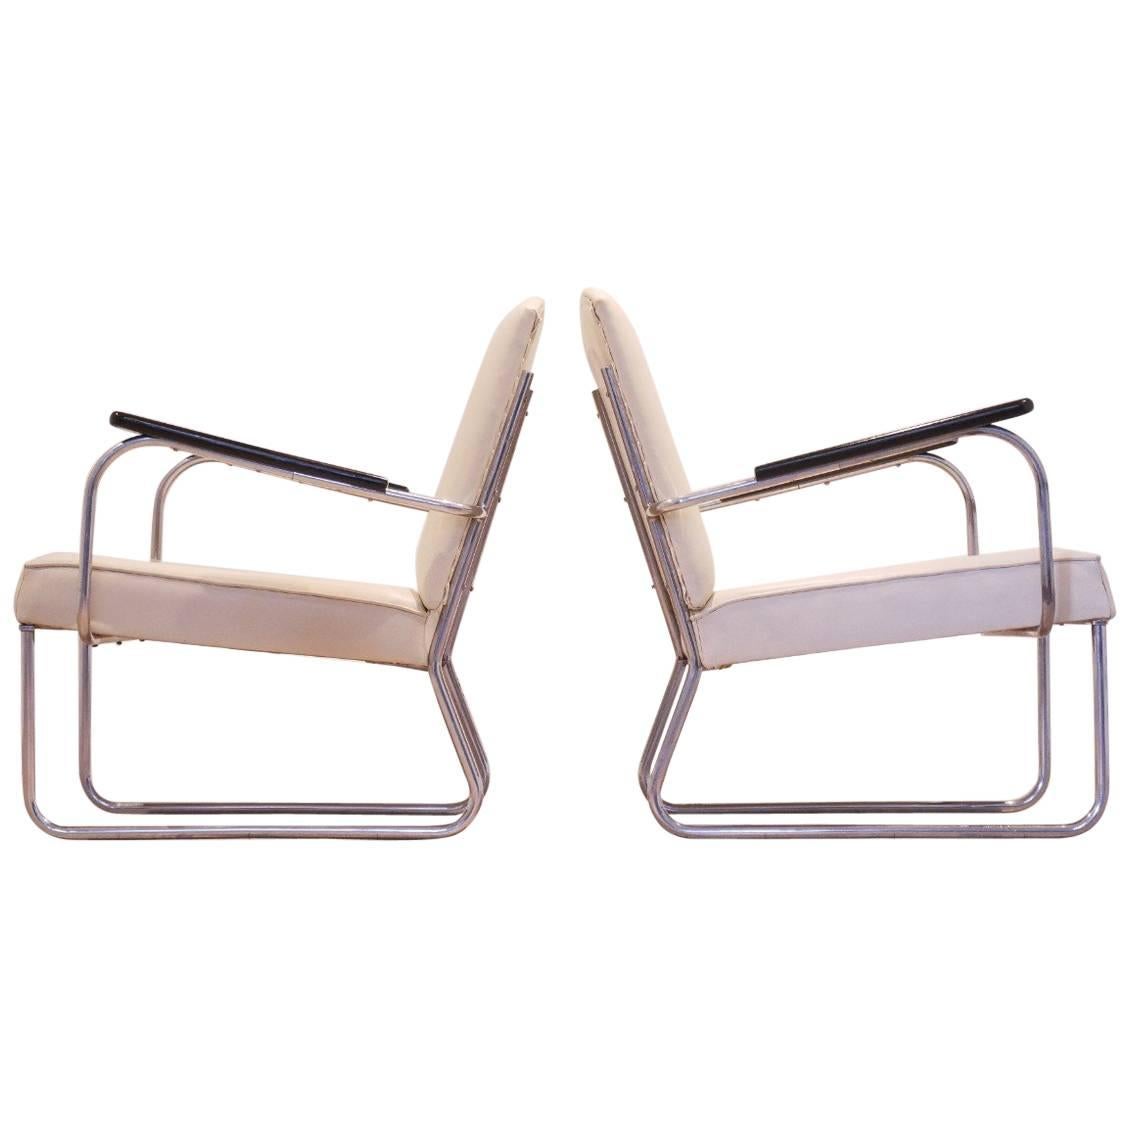 Bauhaus Period Jan Schroefer 1935 Tubular Chromium Easy Chairs for Cirkel For Sale